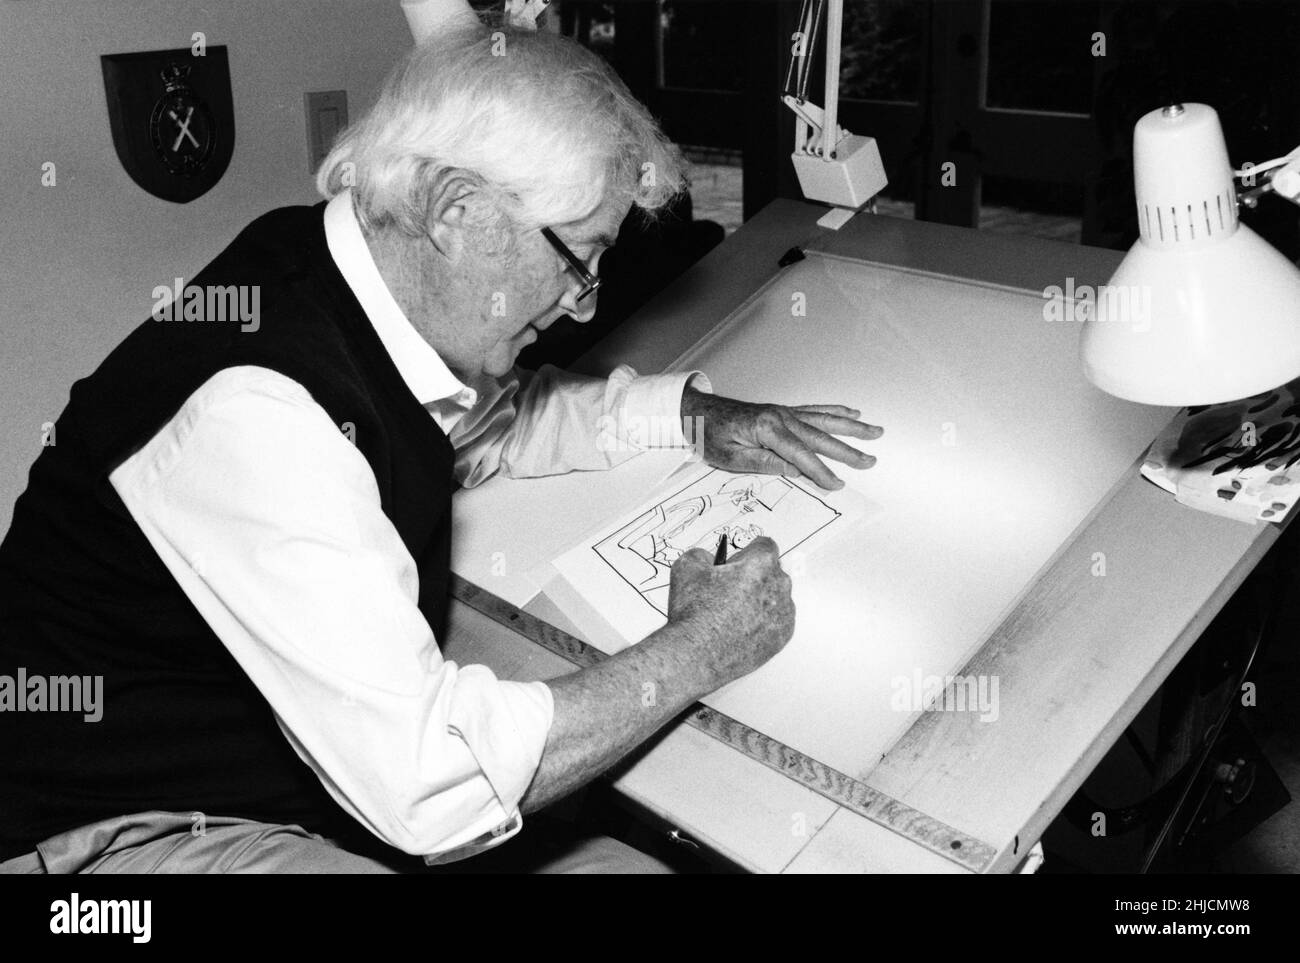 Hank Ketcham, the creator of Dennis the Menace, at his drawing table in his studio. Stock Photo